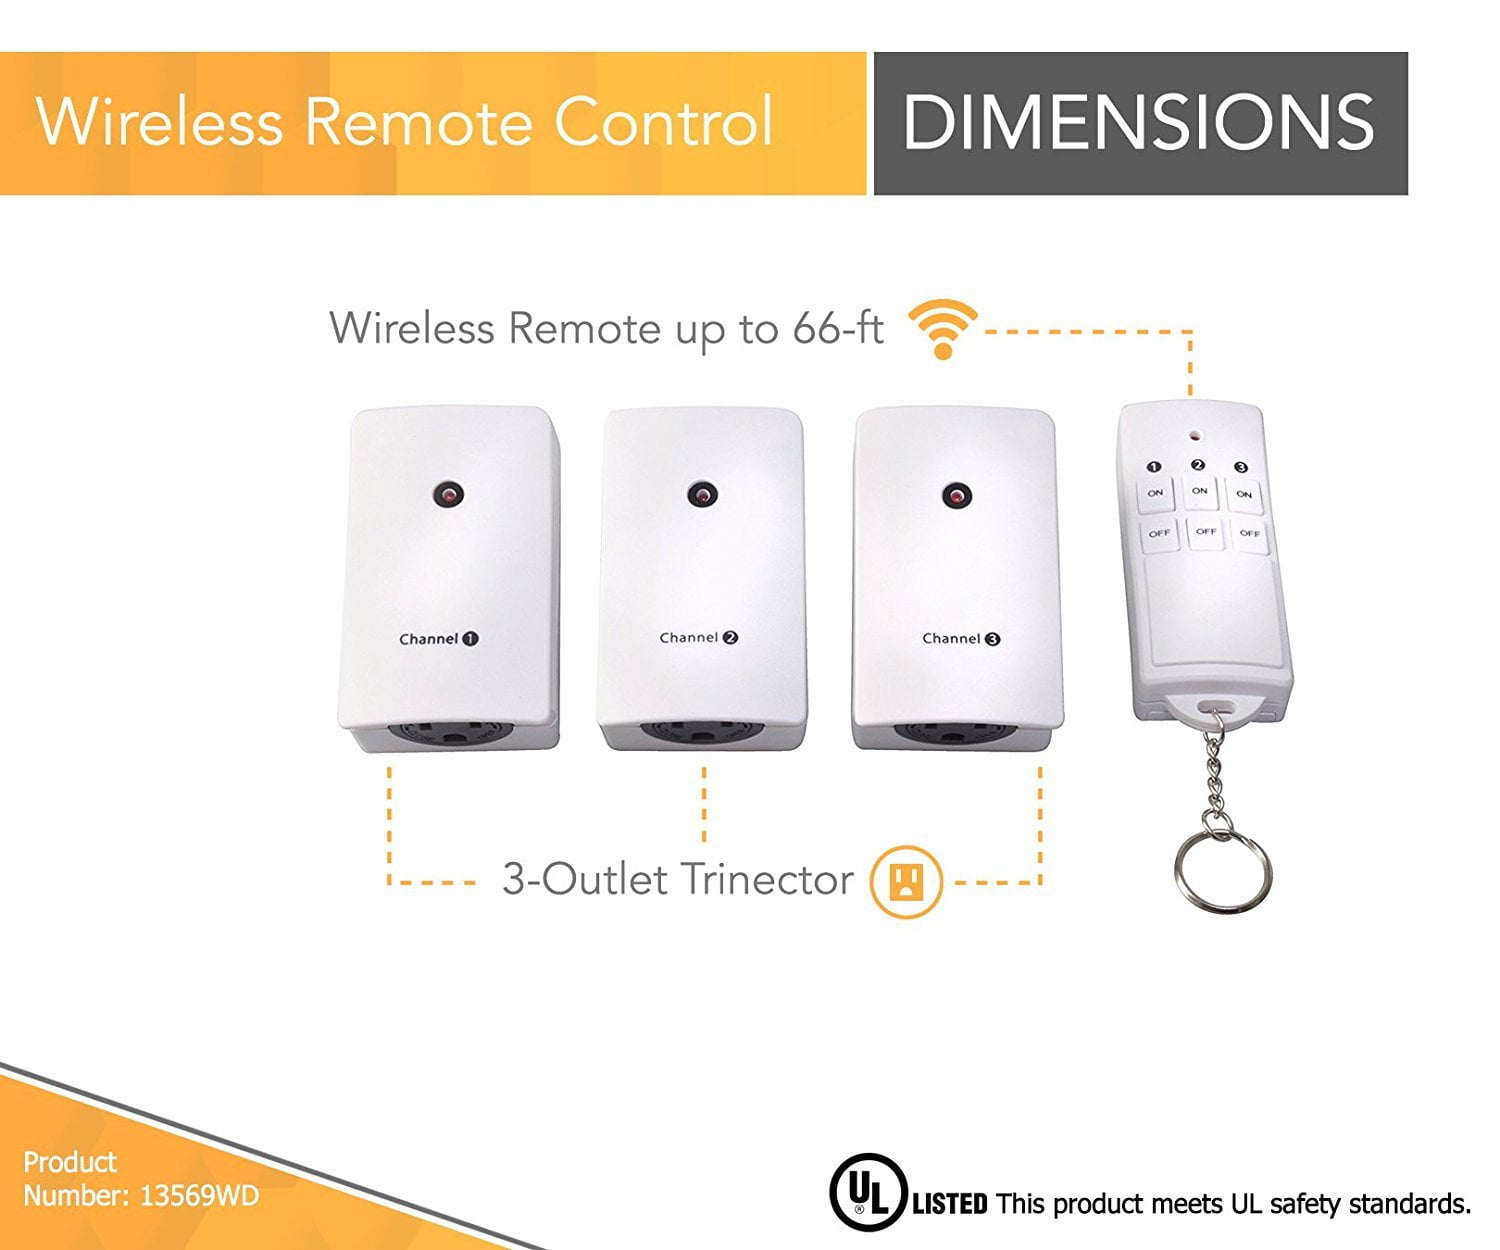 WESTINGHOUSE 3-PACK INDOOR Wireless Remote System Model #TK301